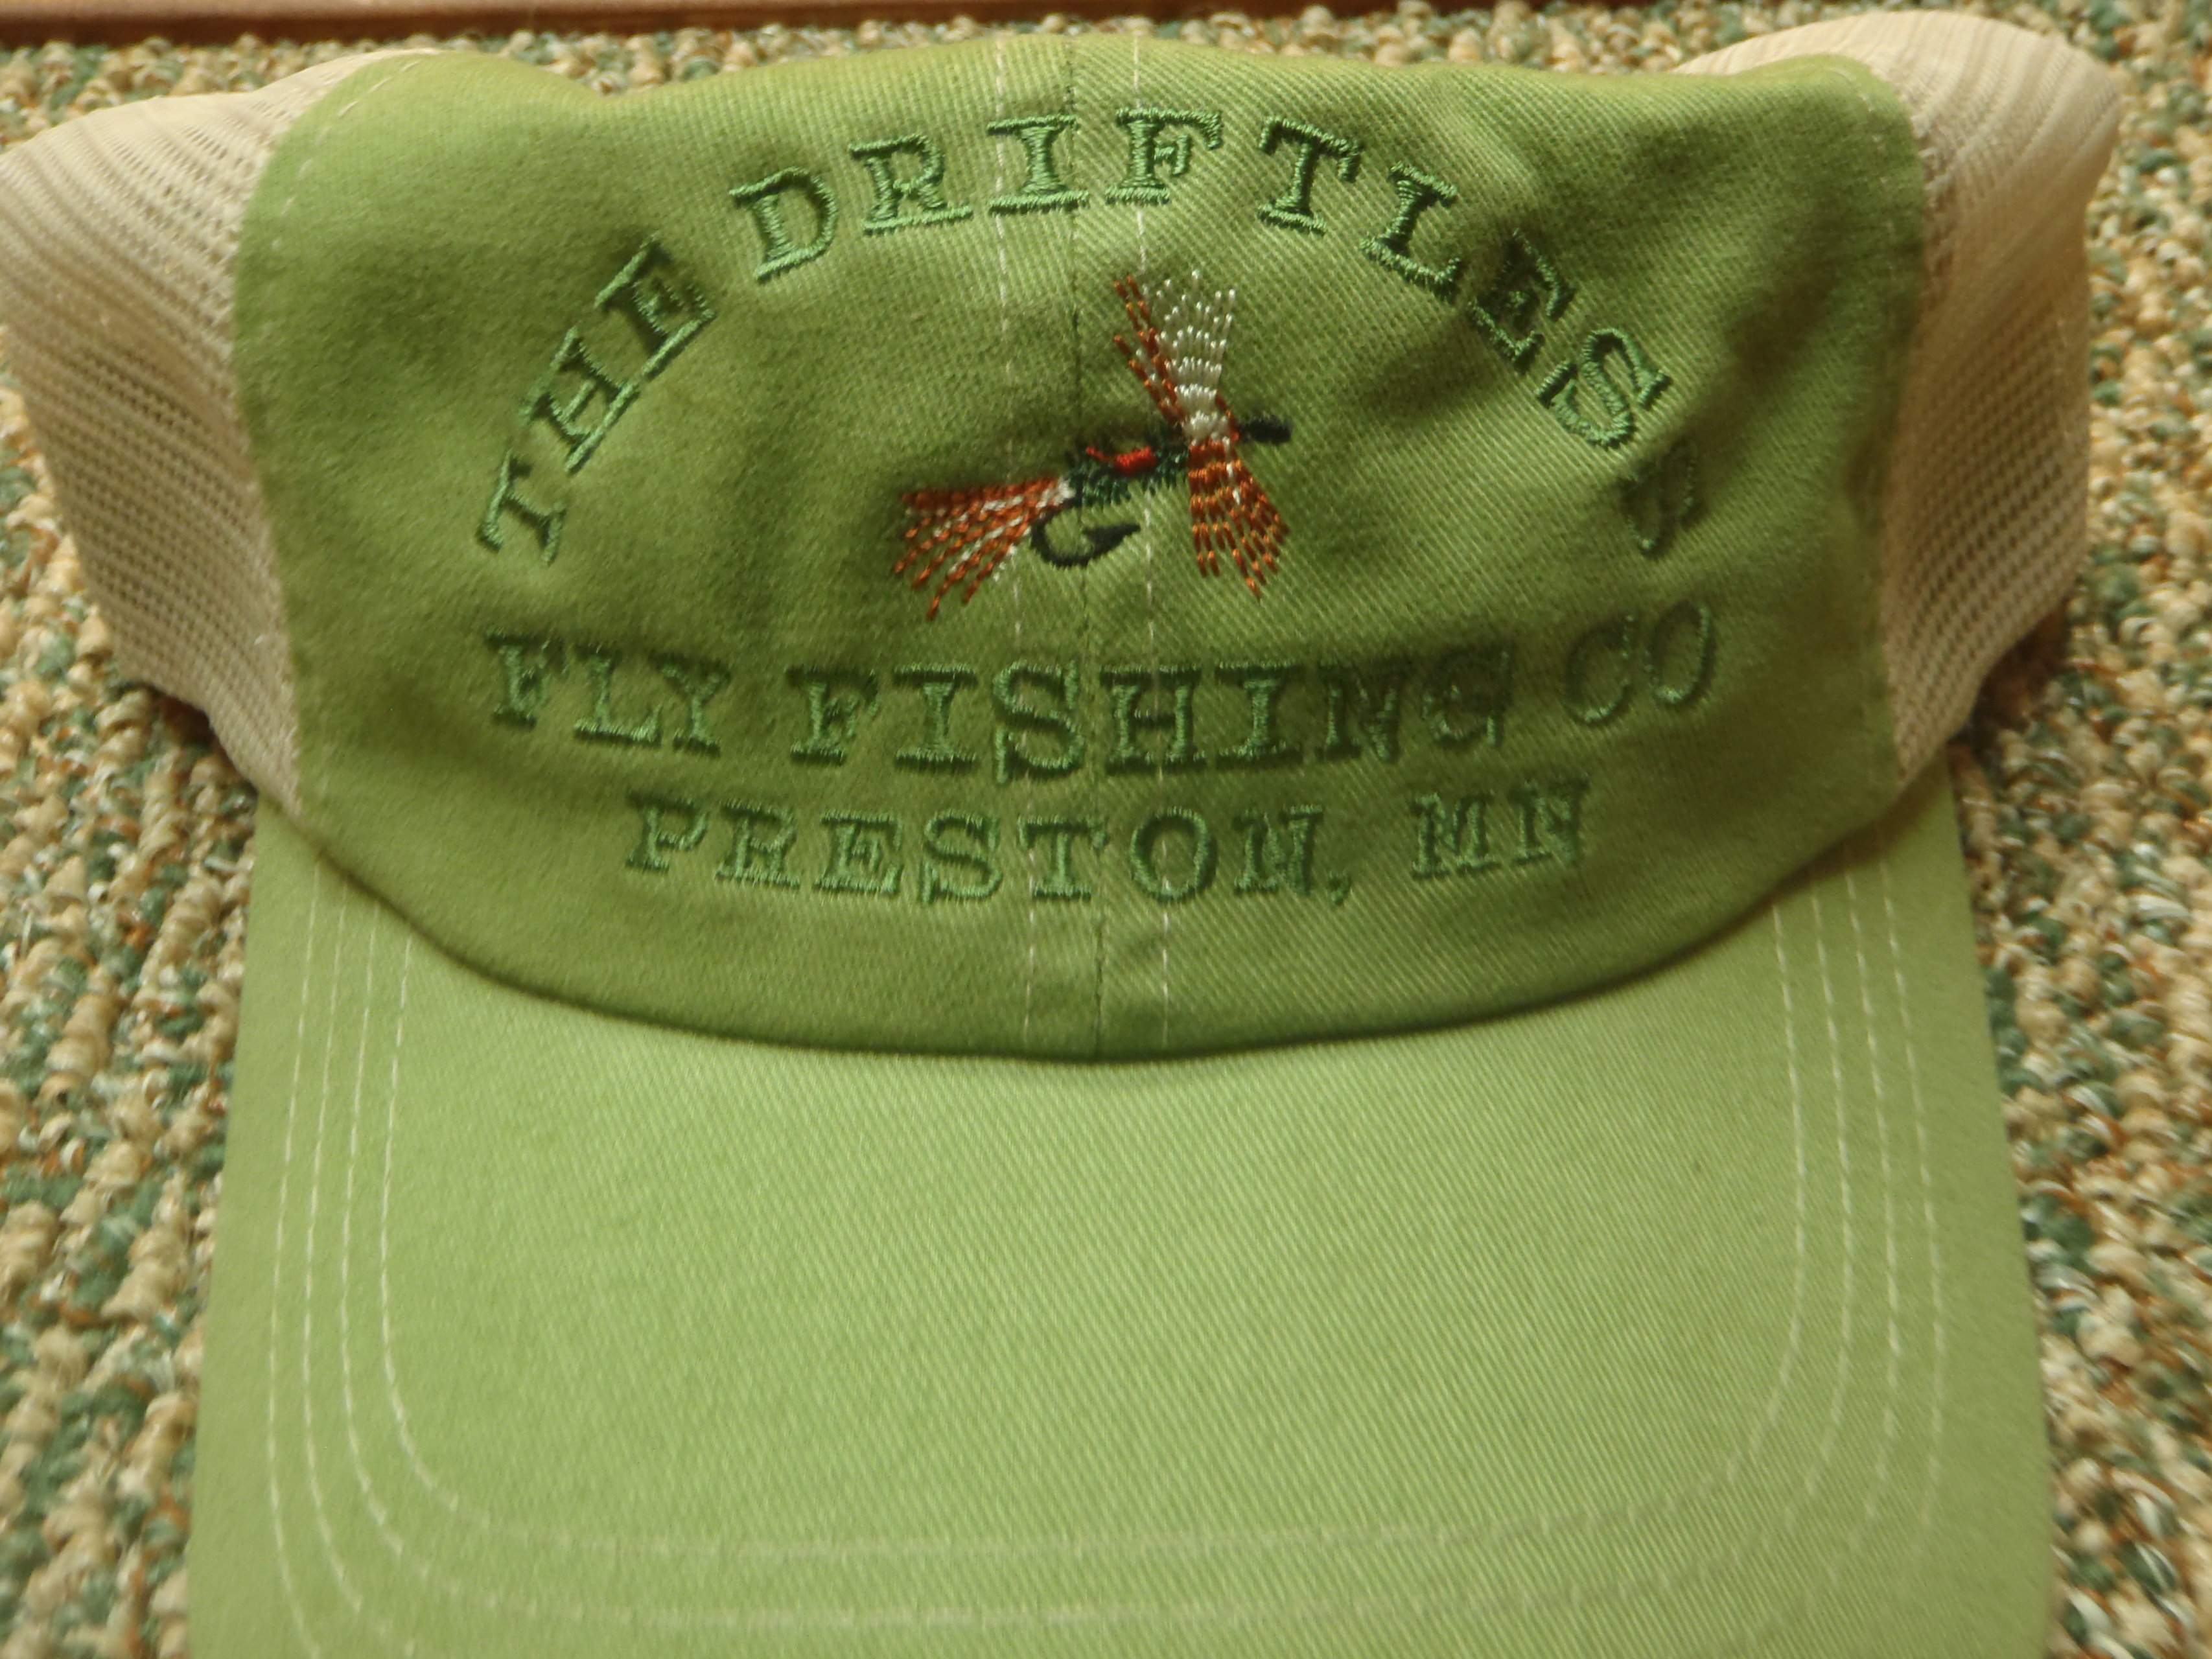 Rare Orvis Brook Trout Hat - Strapback $85 #flyfishing